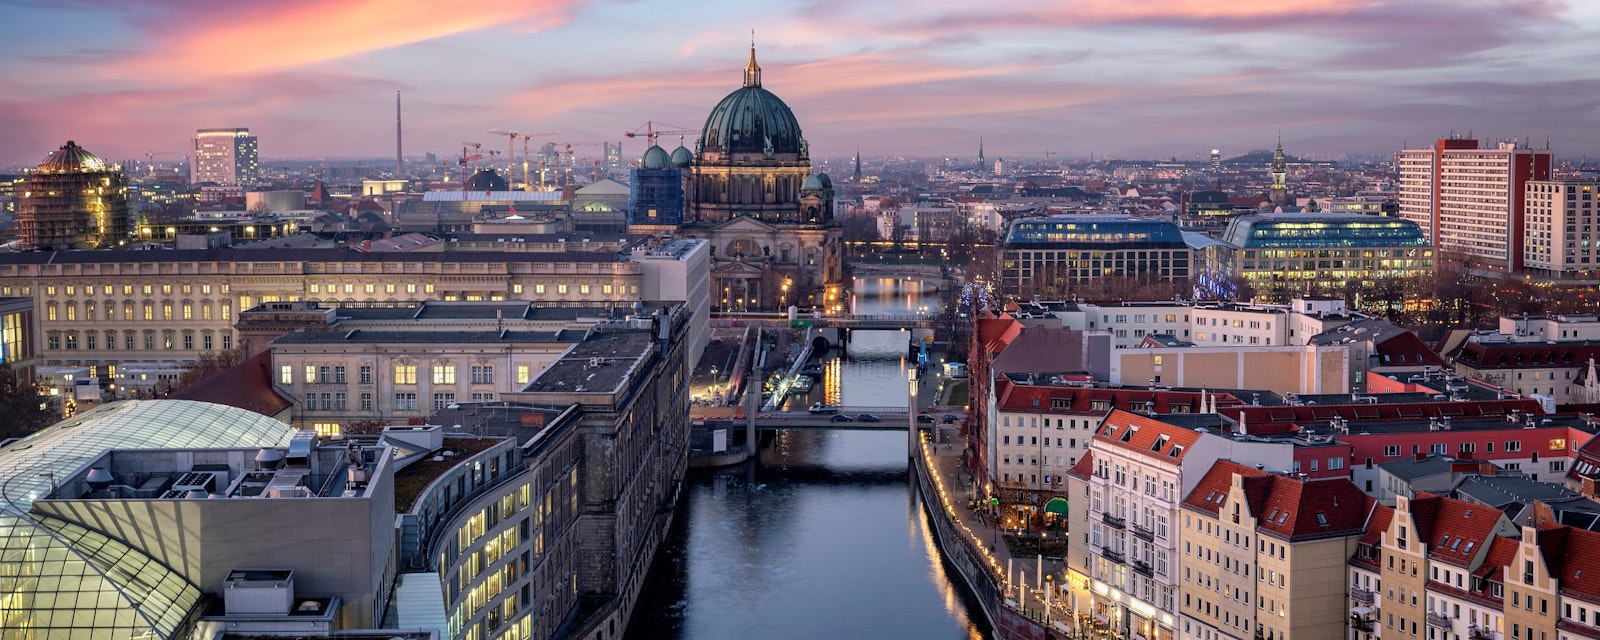 Panoramic,View,Of,The,Skyline,Of,Berlin,,Germany,,With,The